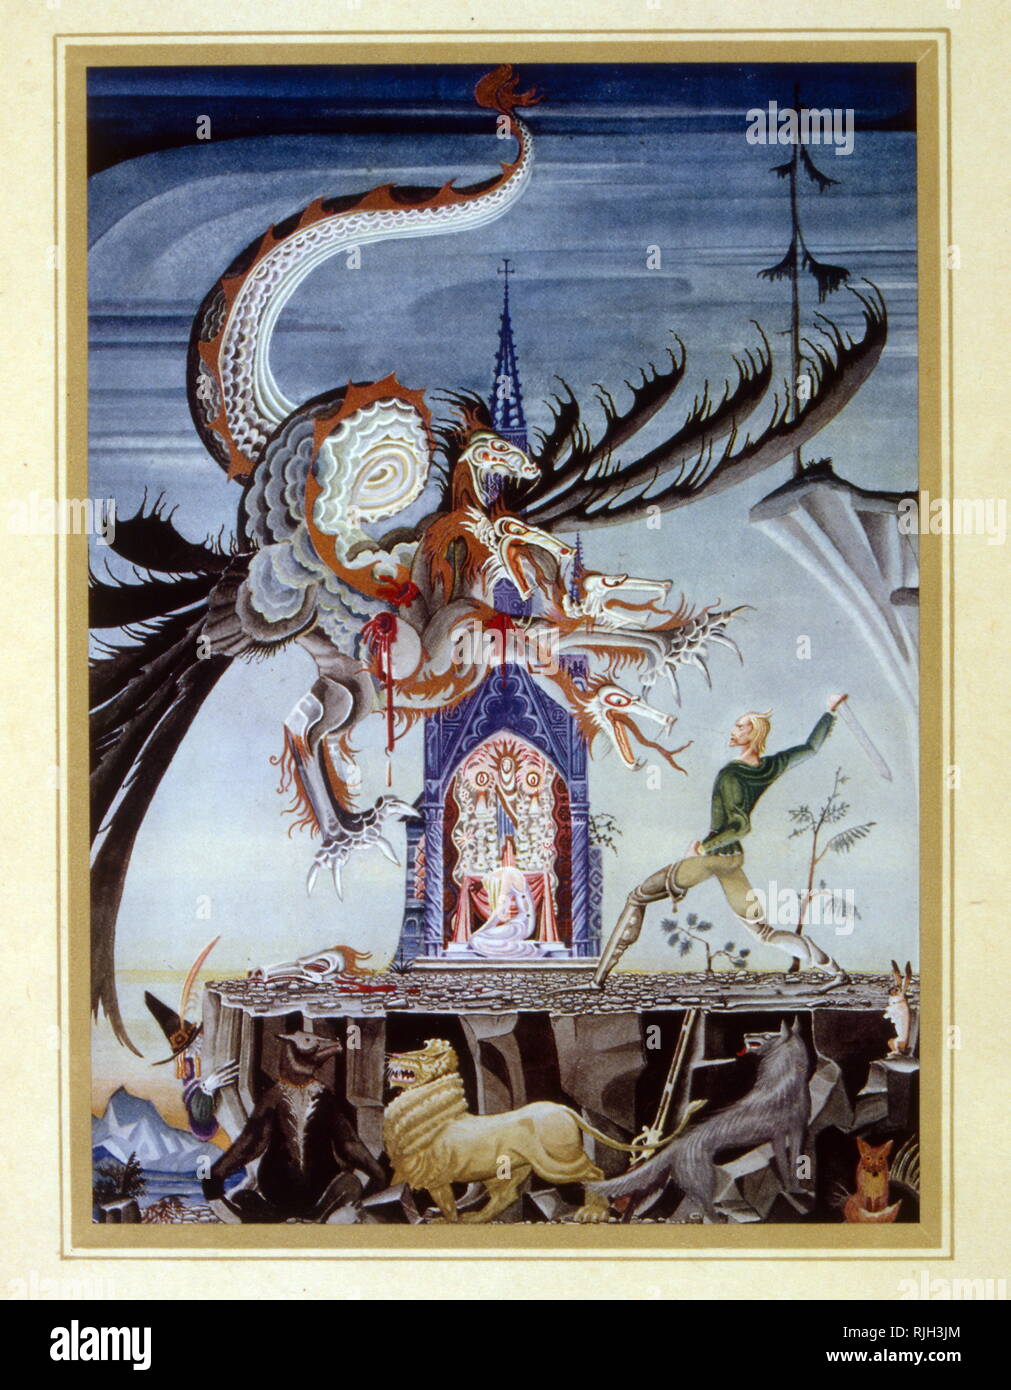 The Seven-Headed Dragon, Fairy Tale by Jacob and Wilhelm Grimm. Illustration by Kay Nielsen, 1925 Stock Photo